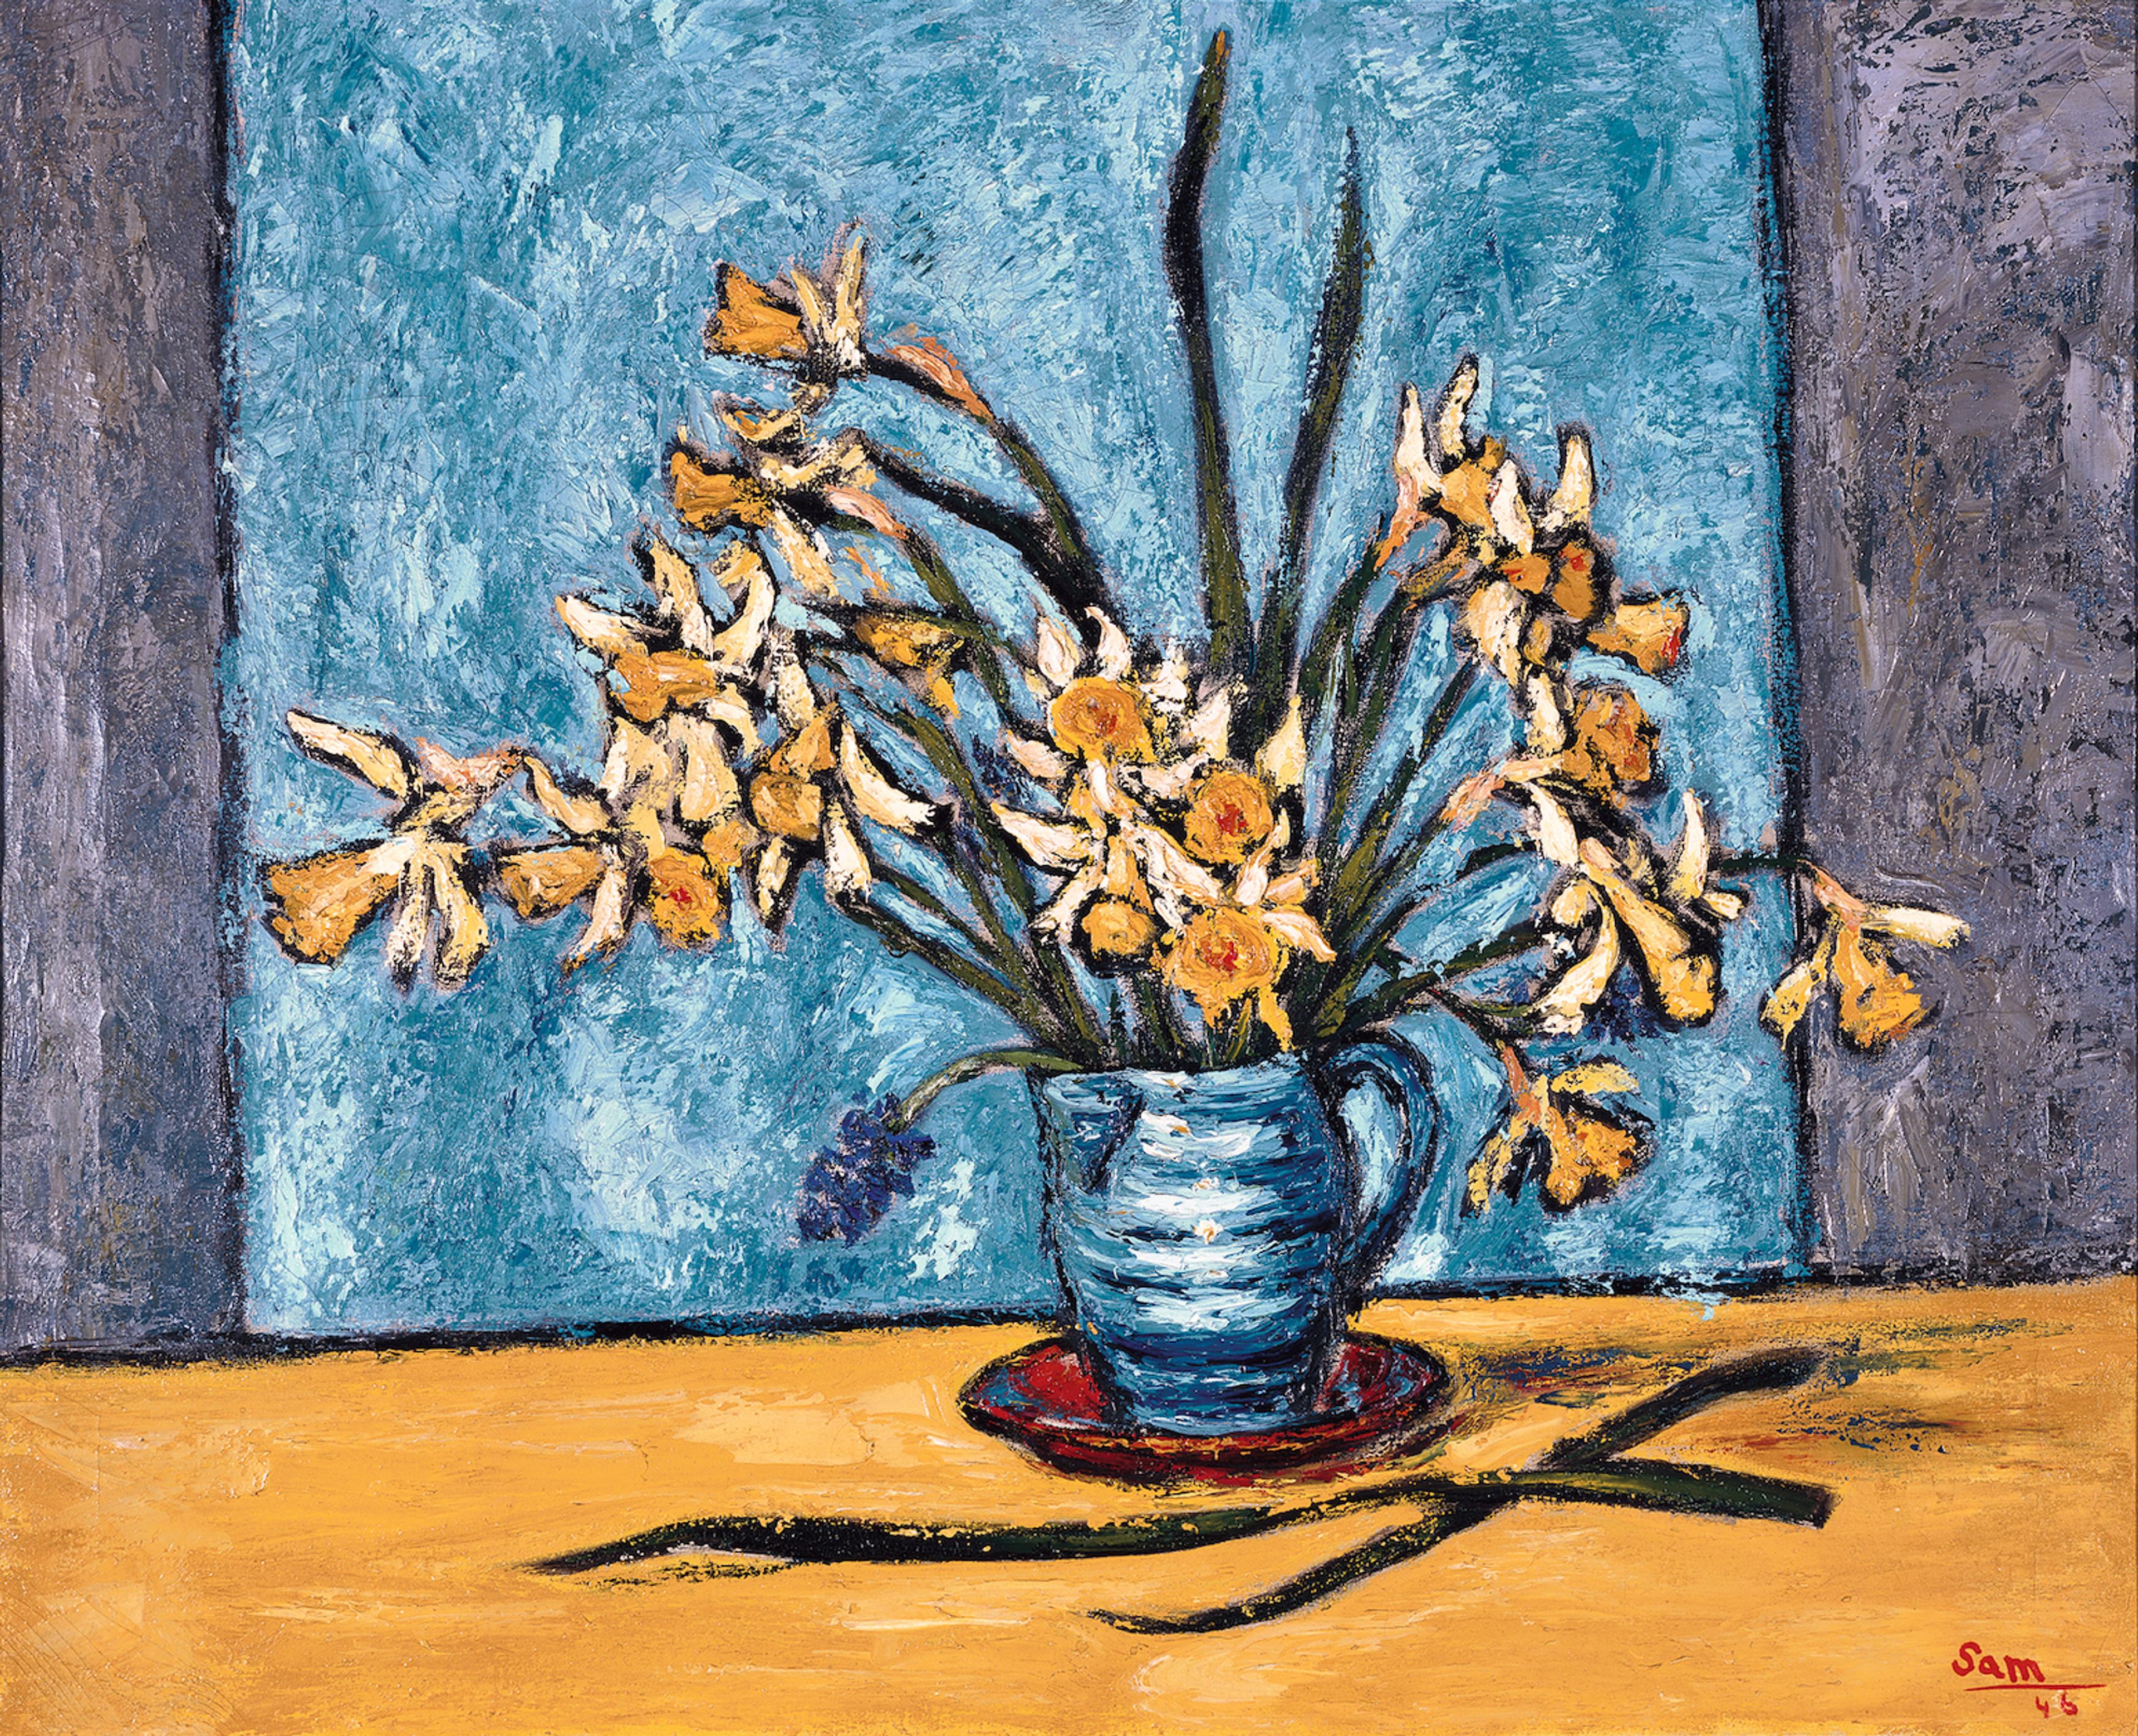 Sam Cairncross, Daffodils, 1946, oil on canvas, Staff Club Collection, purchased 1947.